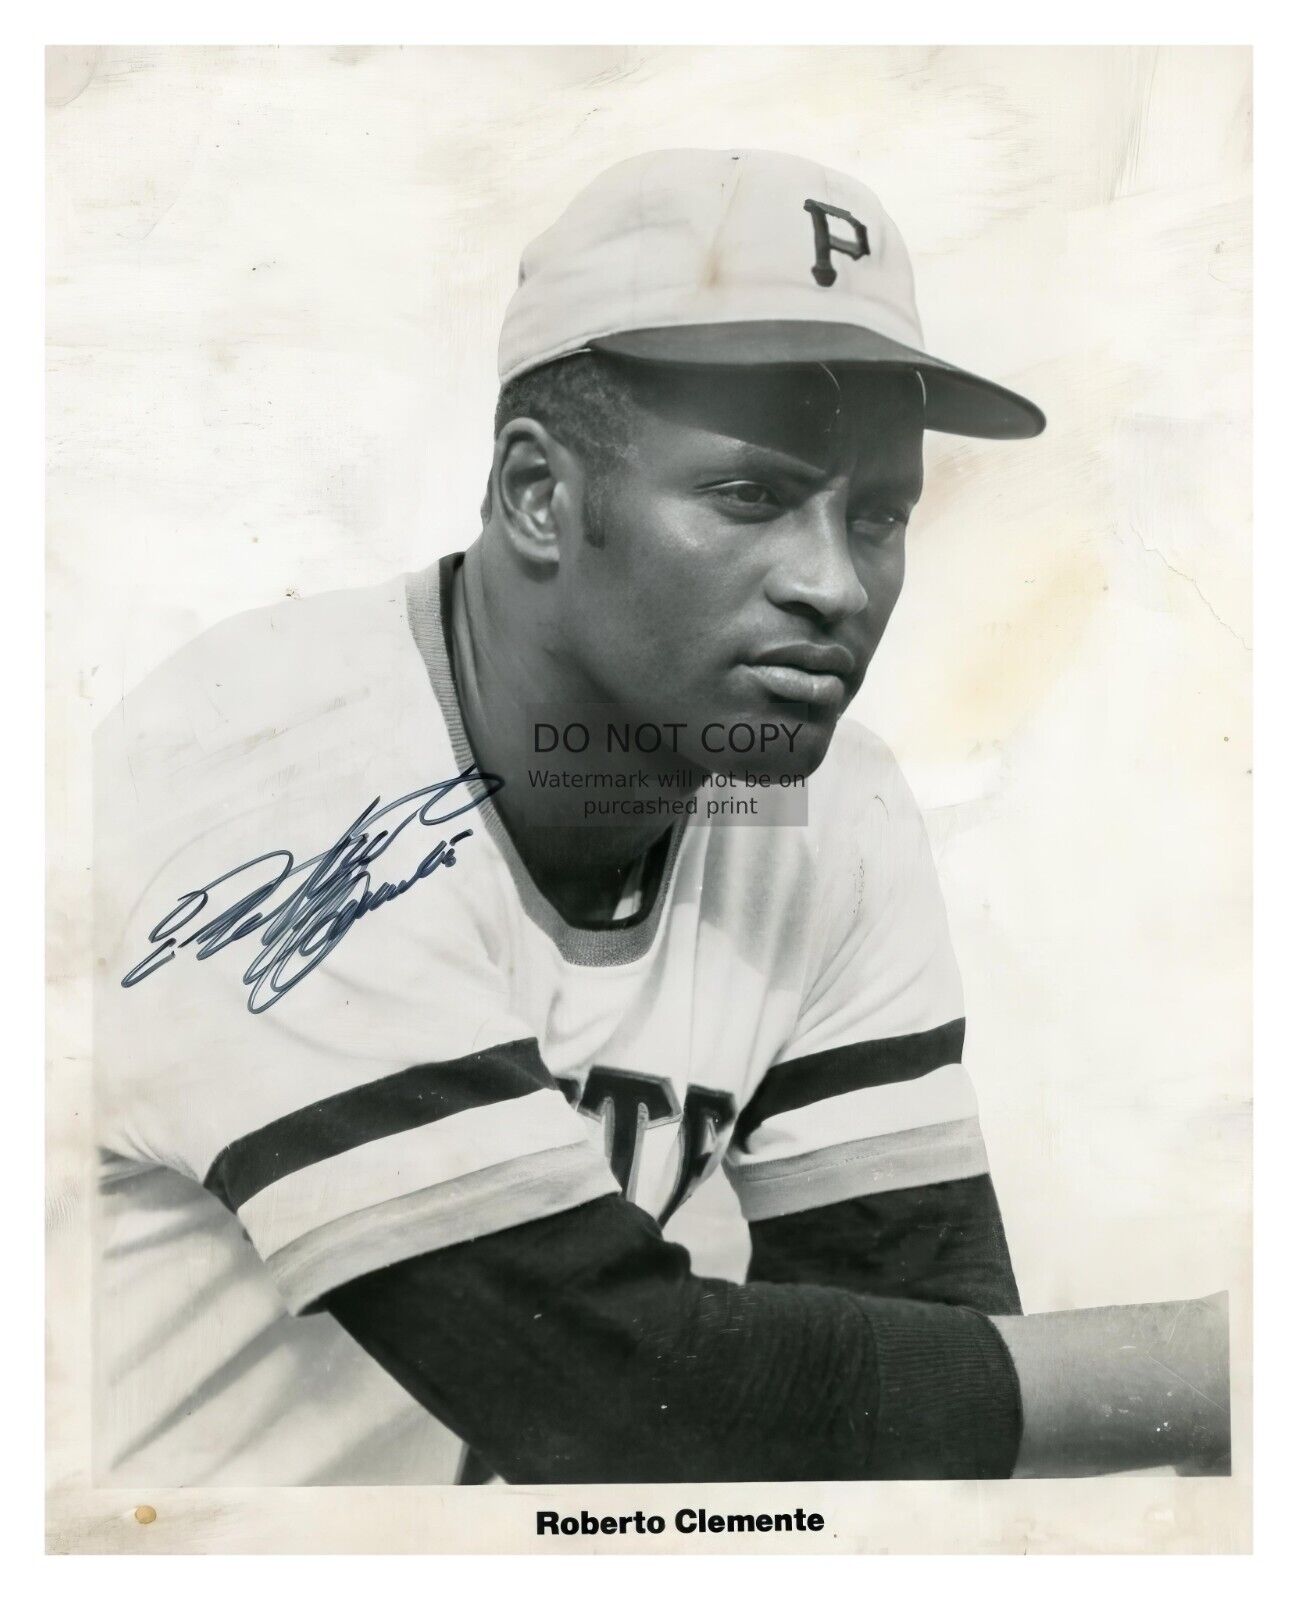 ROBERTO CLEMENTE PITTSBURGH PIRATES BASEBALL PLAYER AUTOGRAPHED 8X10 PHOTO